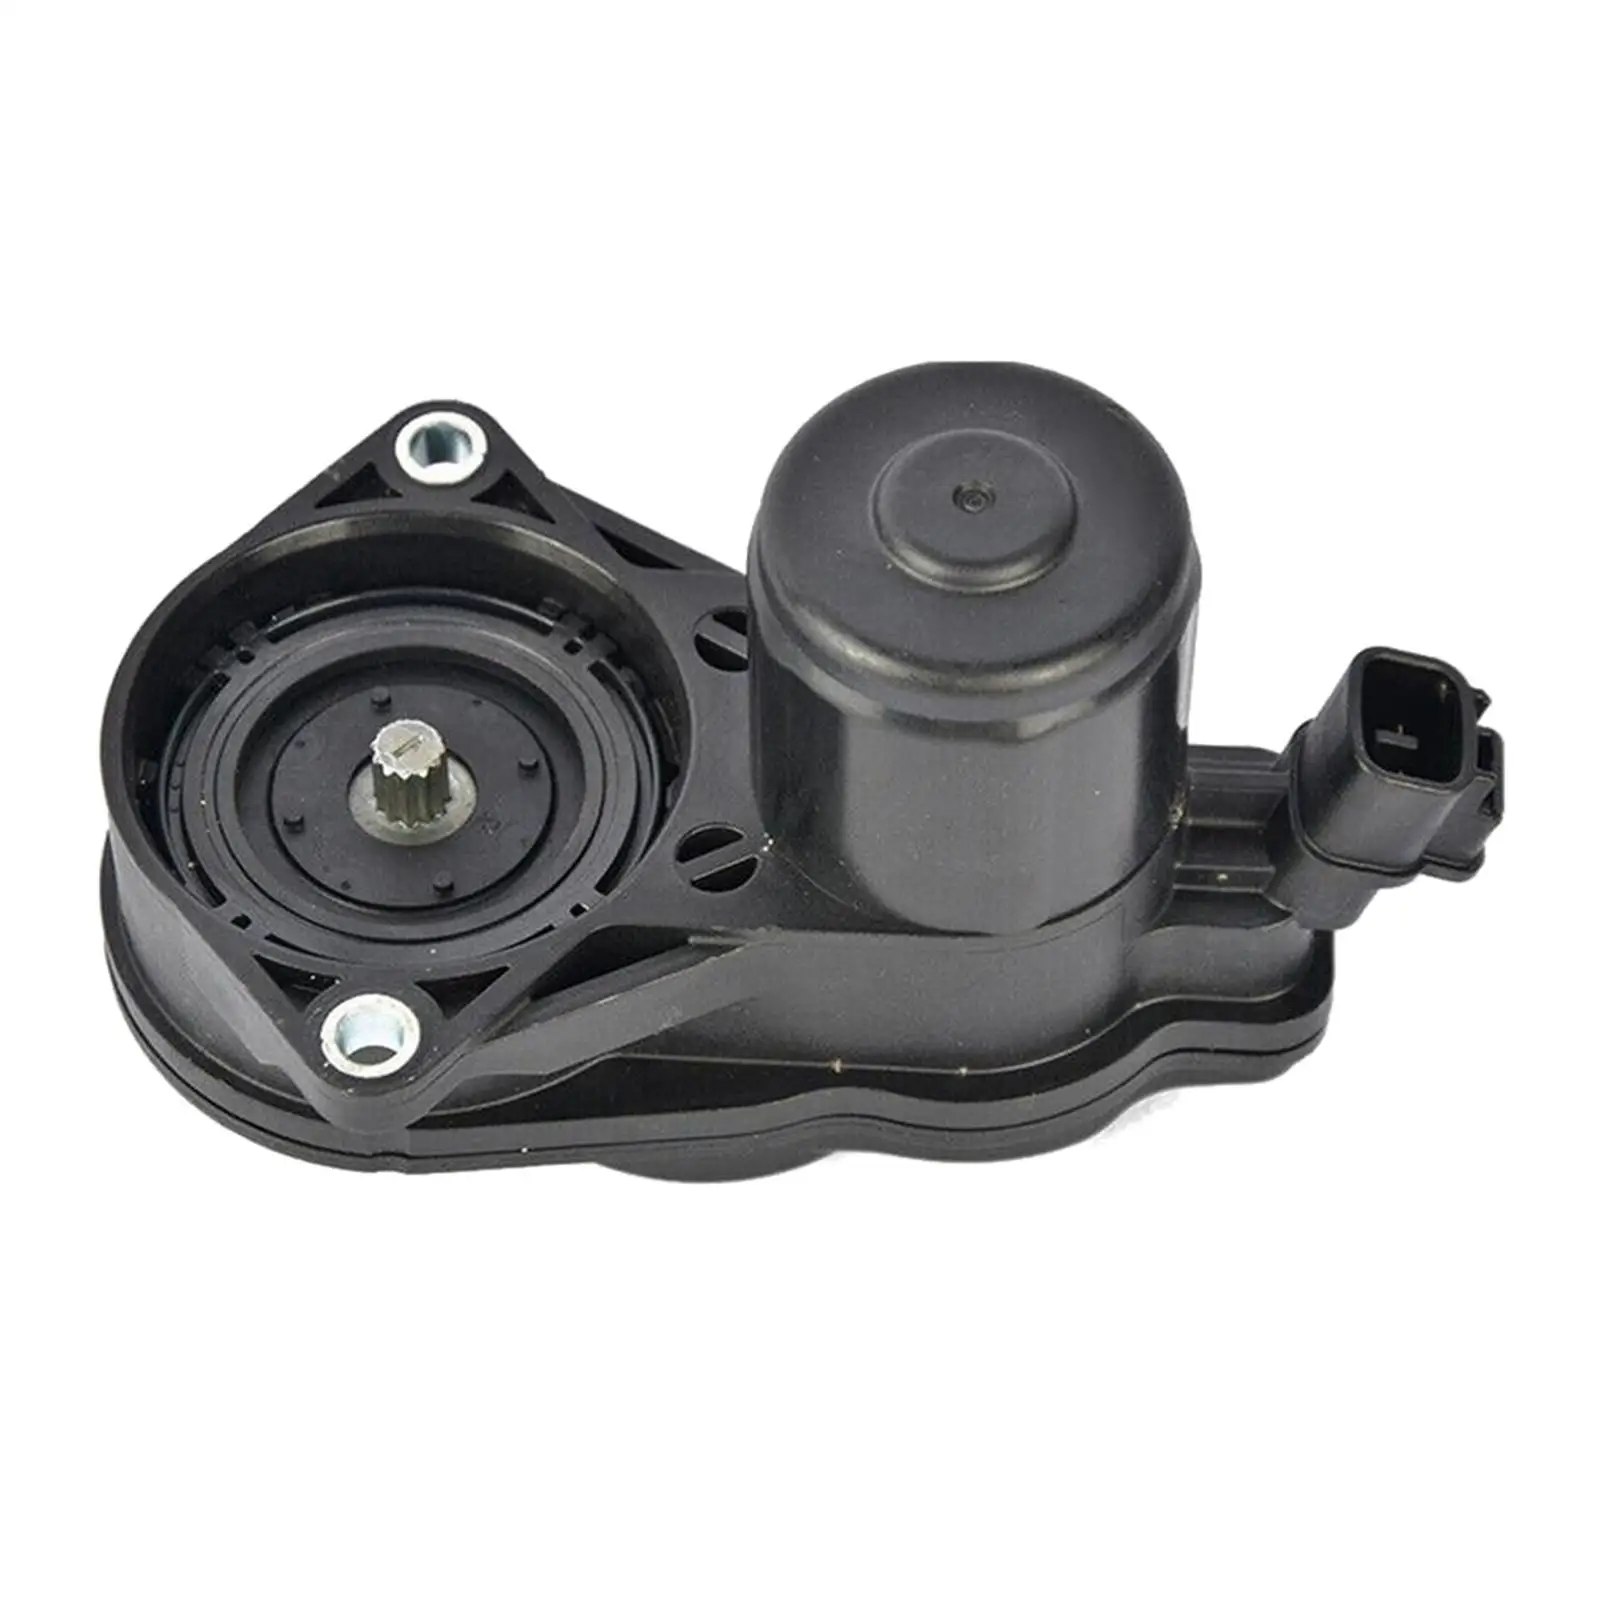 Parking Brake Actuator Assembly Replaces Car Accessories for Toyota for sienna Corolla Sedan Avalon Convenient Installation